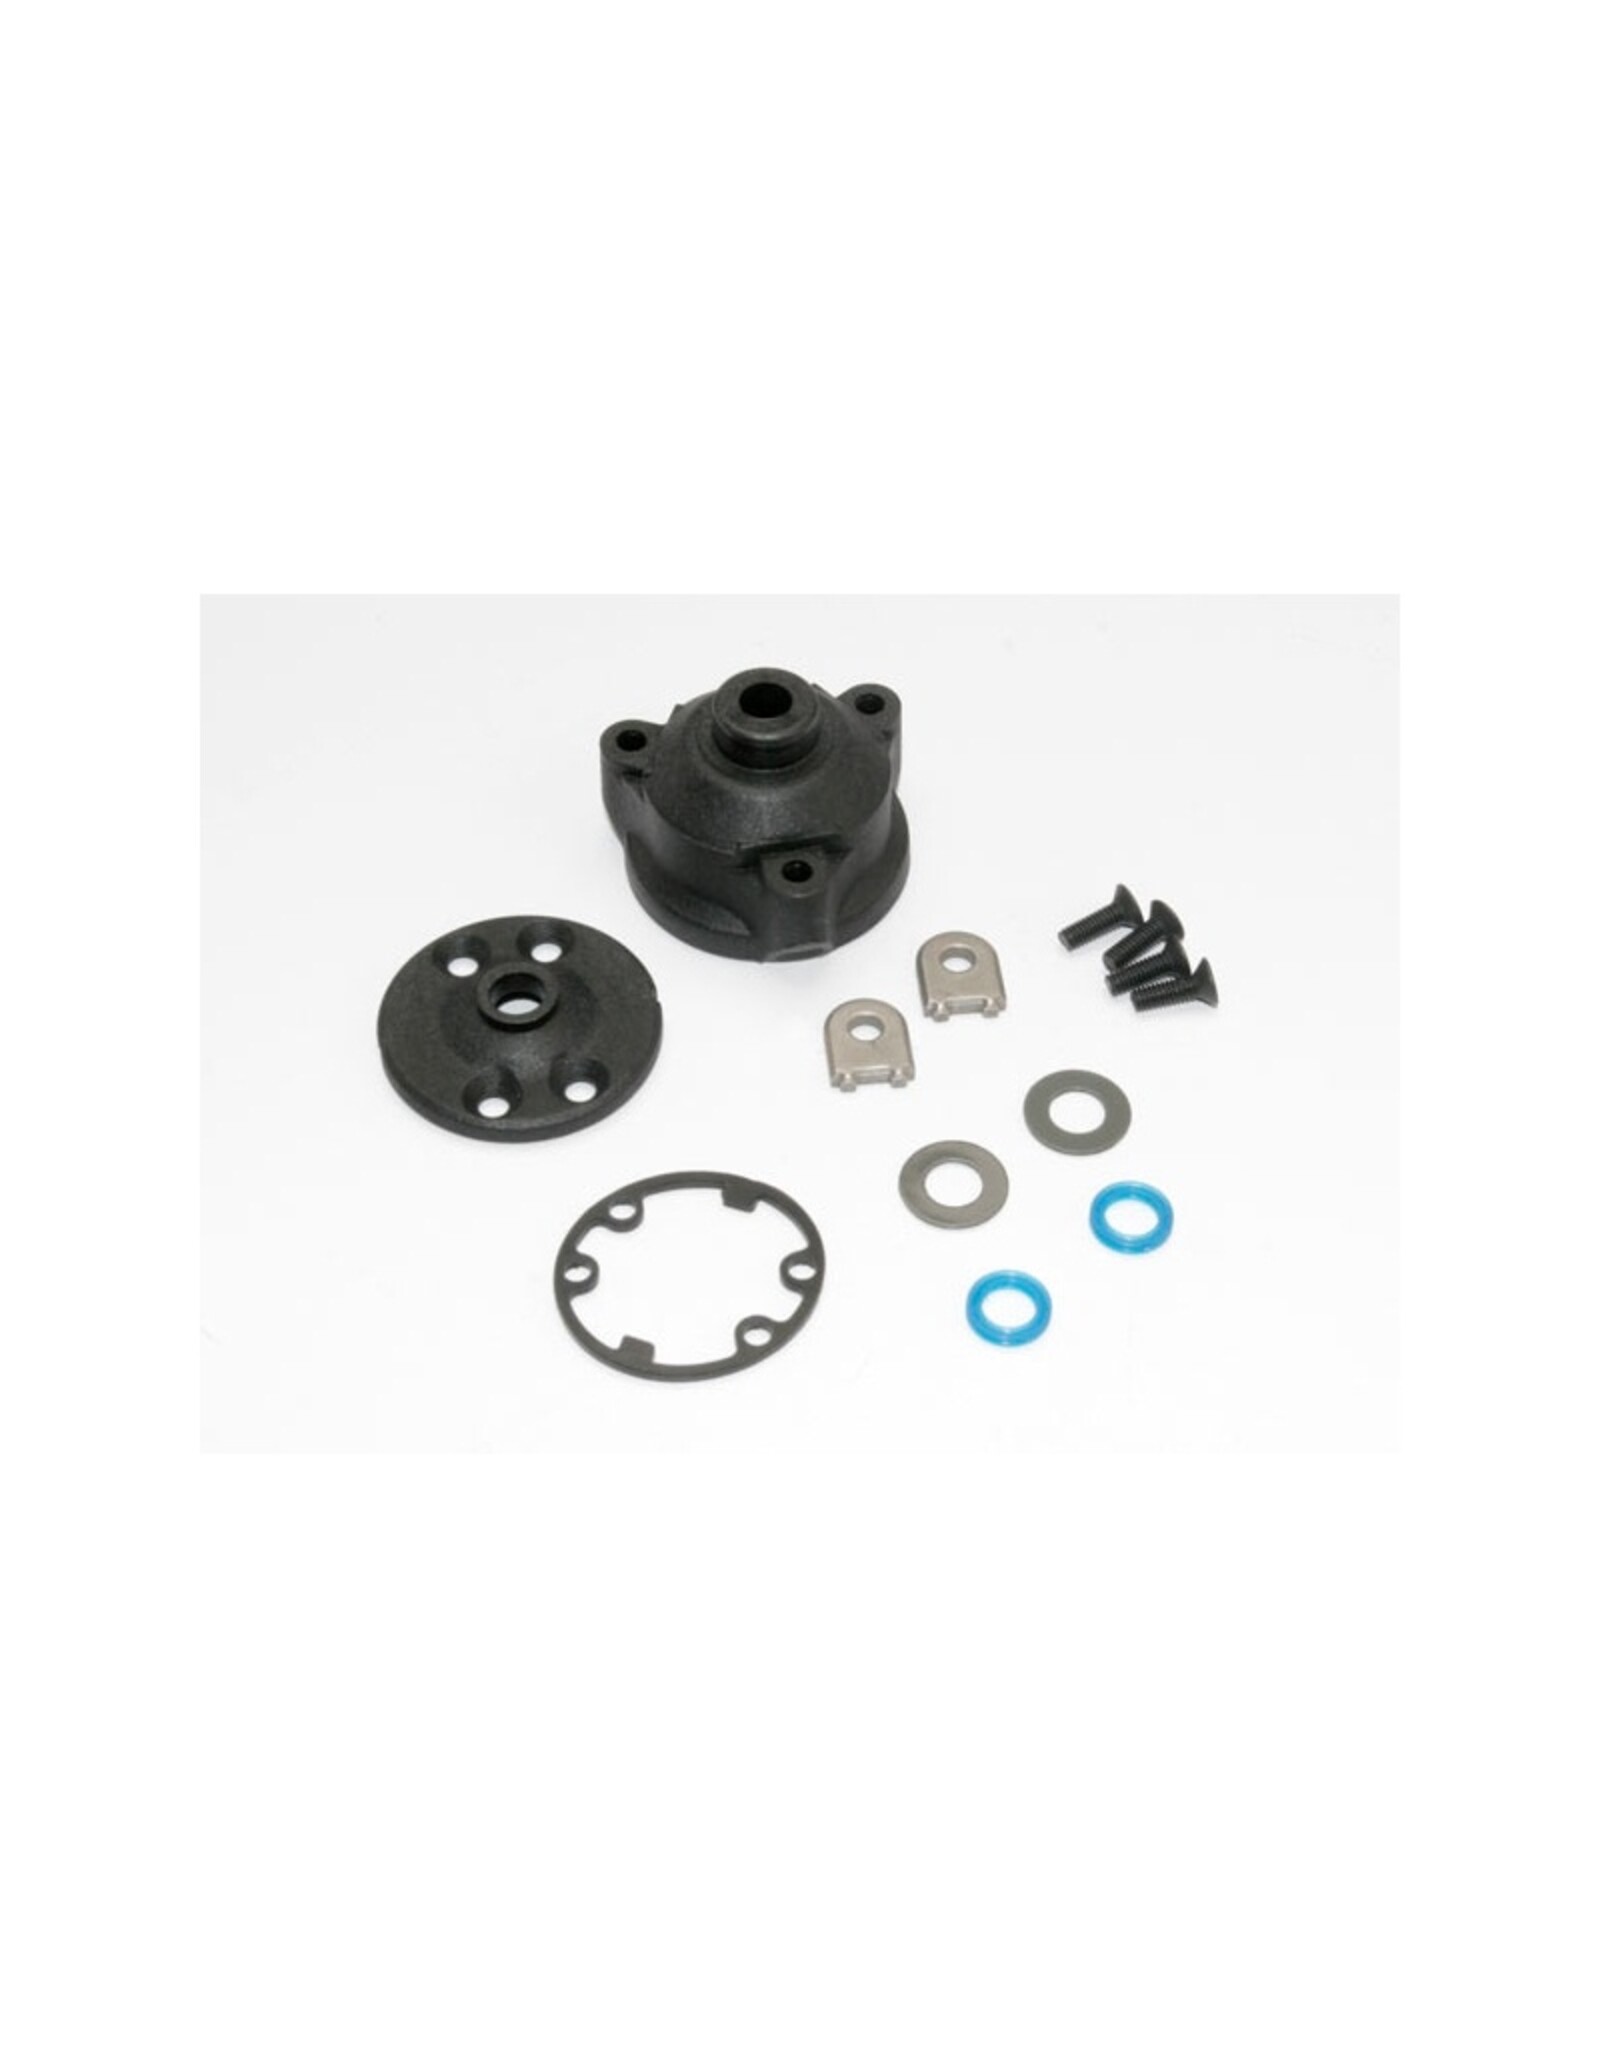 Traxxas TRA6884 Housing Center Differential